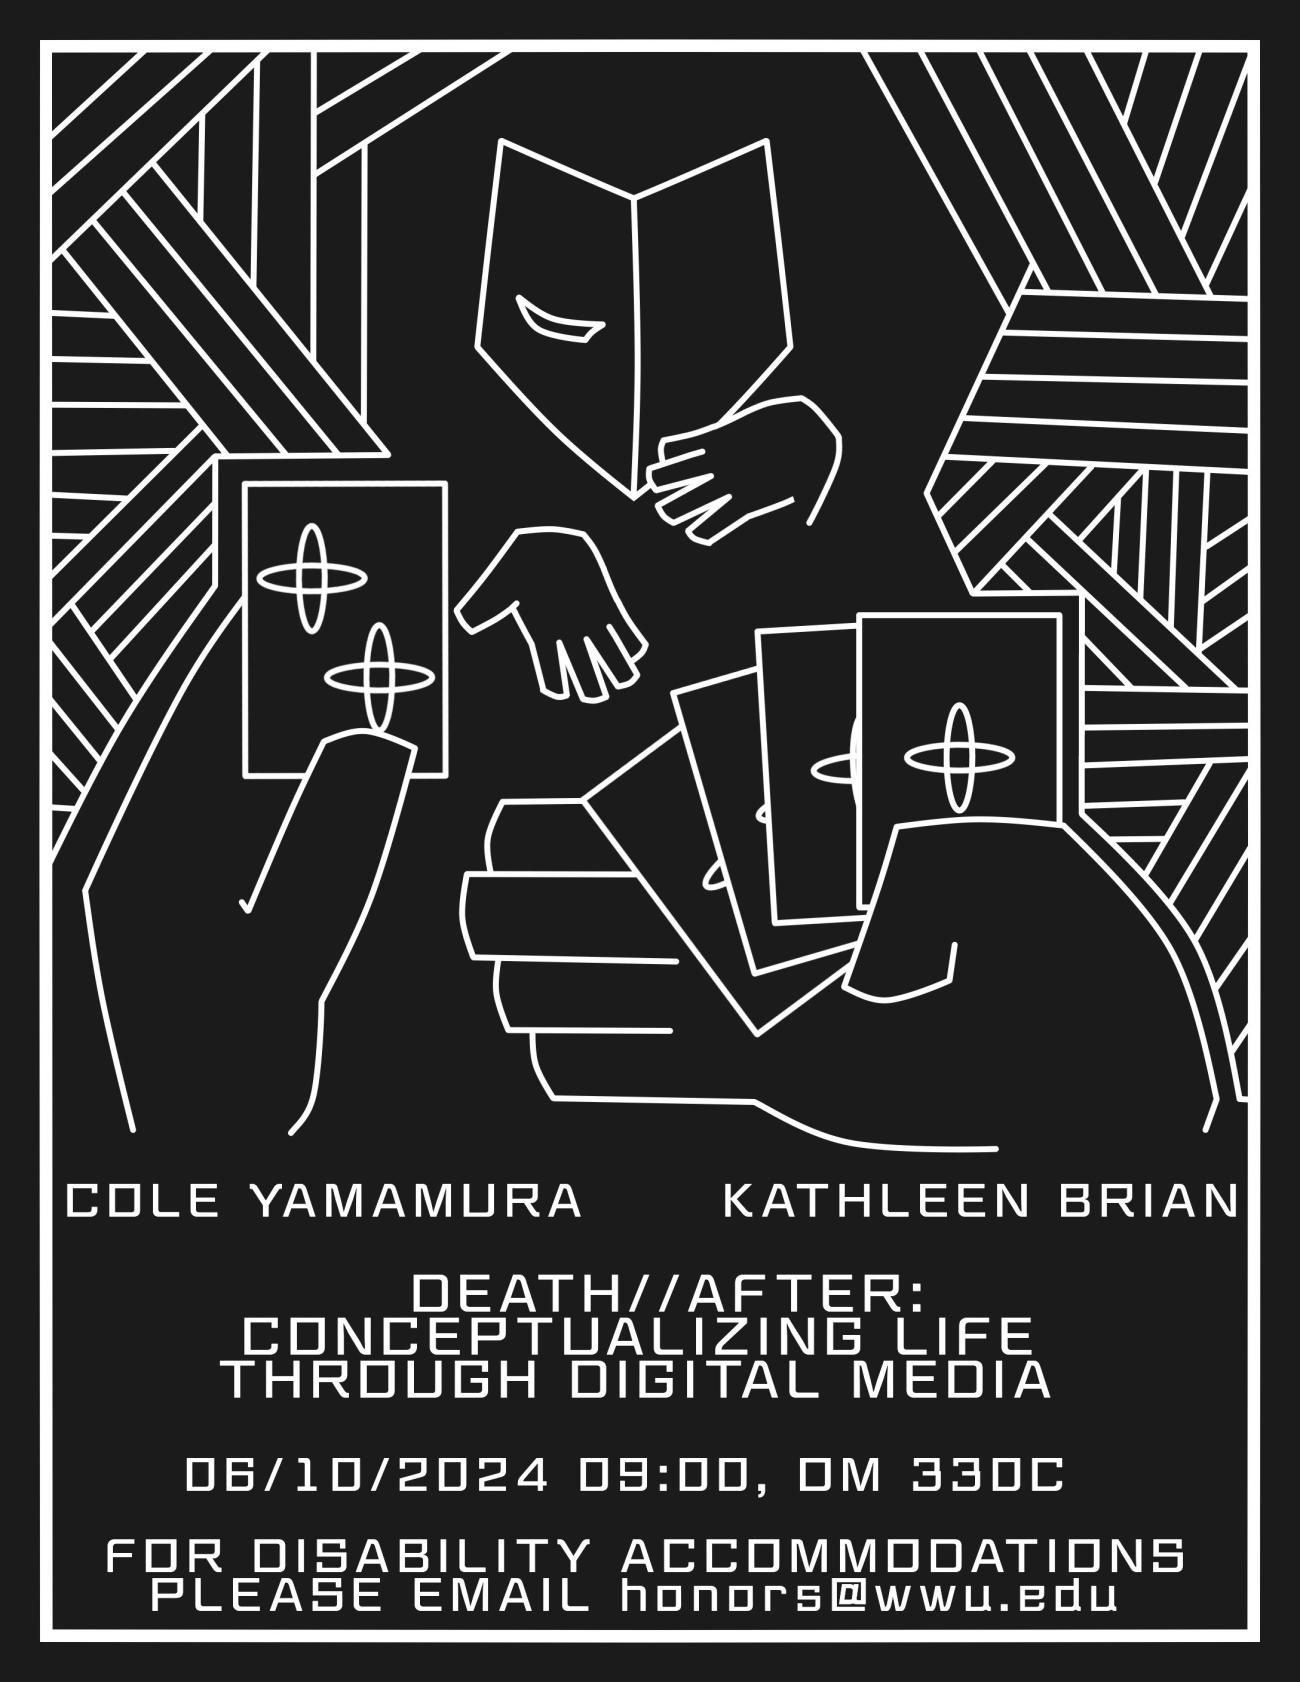 Point-of-view is two hands, 4 cards with a plus sigil on each in their right hand, and one card with two plus sigils in their left. Across from them is a masked individual, the opera mask etched with a closed right eye, reaching out to collect the cards. Black and white, hand drawn. The bottom of the poster reads “Cole Yamamura, Kathleen Brian. Death//After: Conceptualizing Life through Digital Media. 06/10/2024 09:00, OM 330C. For disability accommodations please email honors@wwu.edu”.